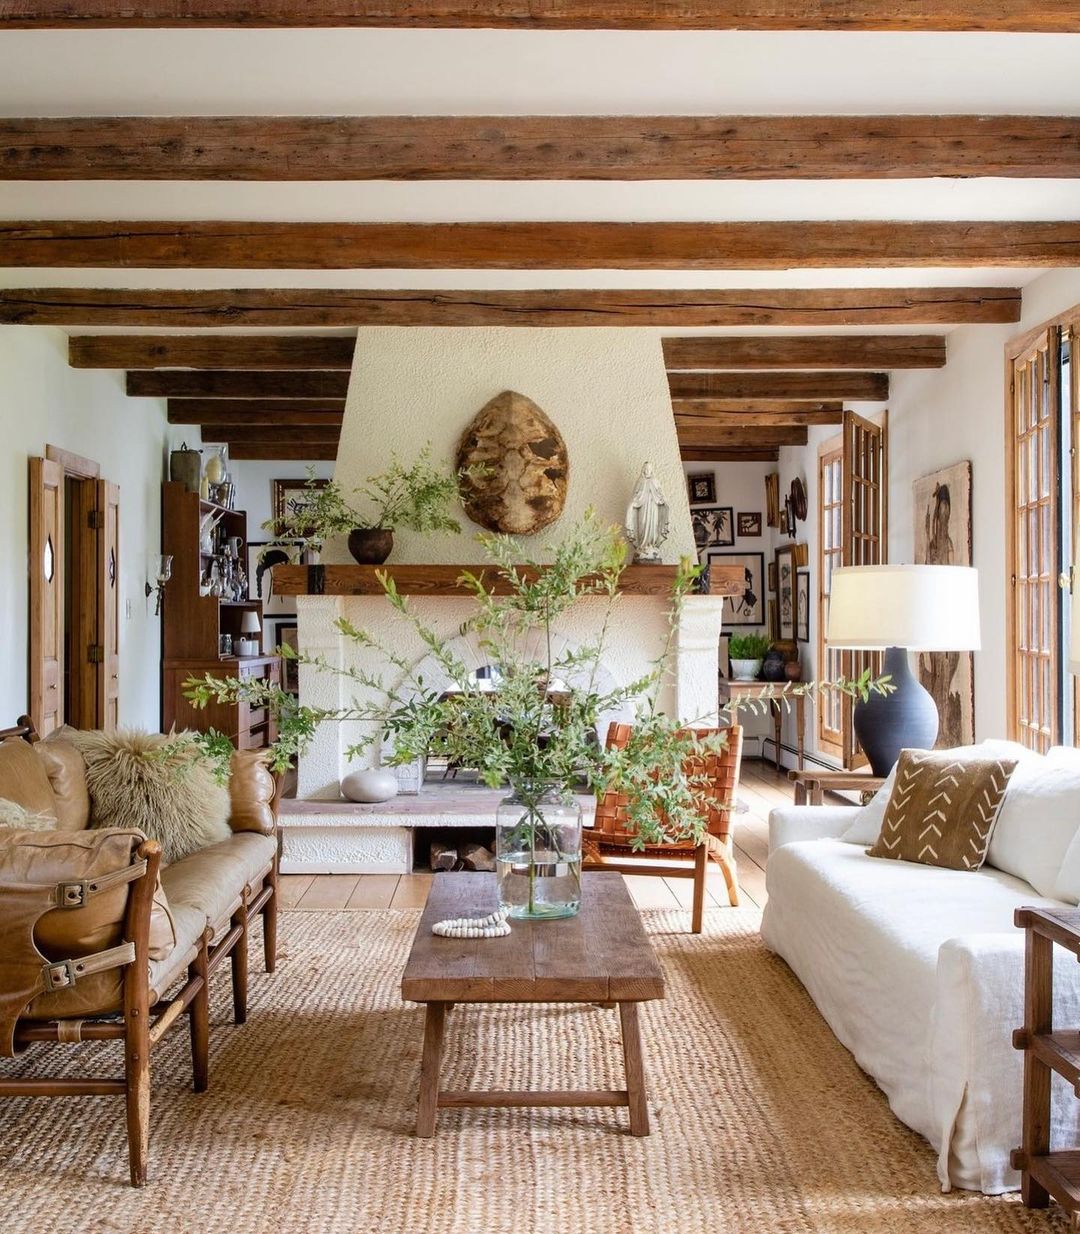 Old-World Charm with Authentic Beams